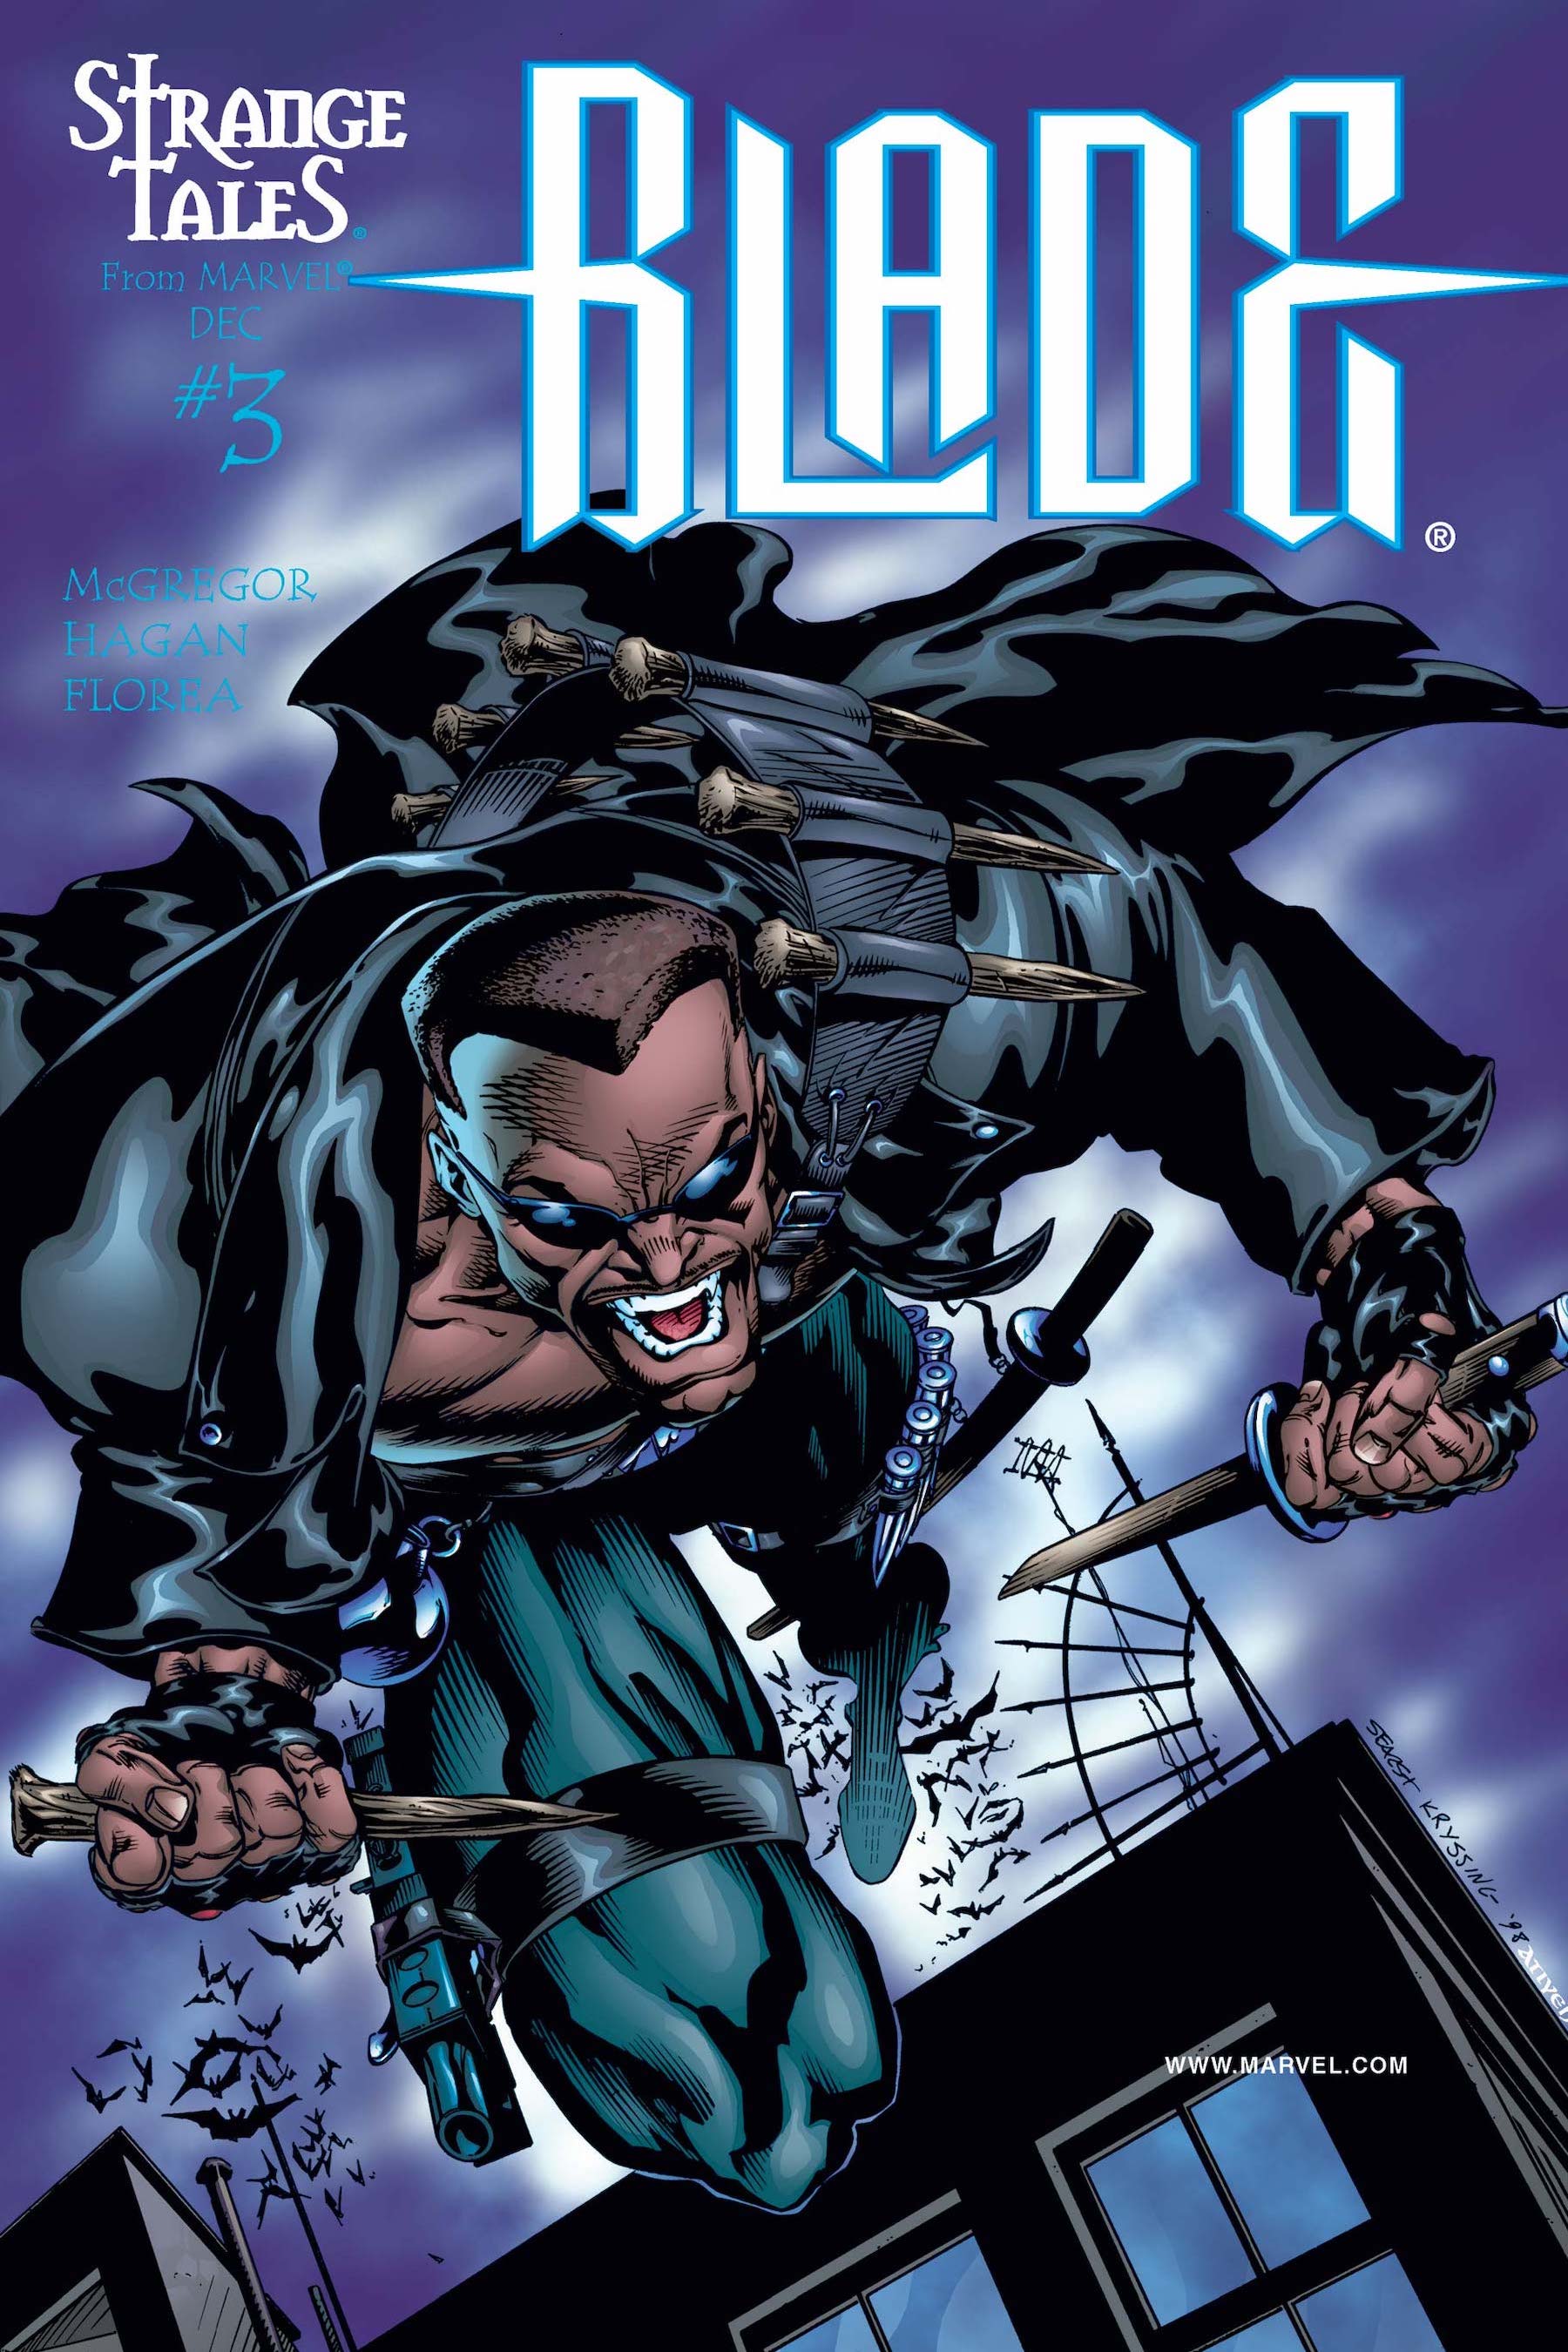 Najee Harris by Ray Anthony Height and Wil Quintana, based on STRANGE TALES: BLADE # 3 by Bart Sears